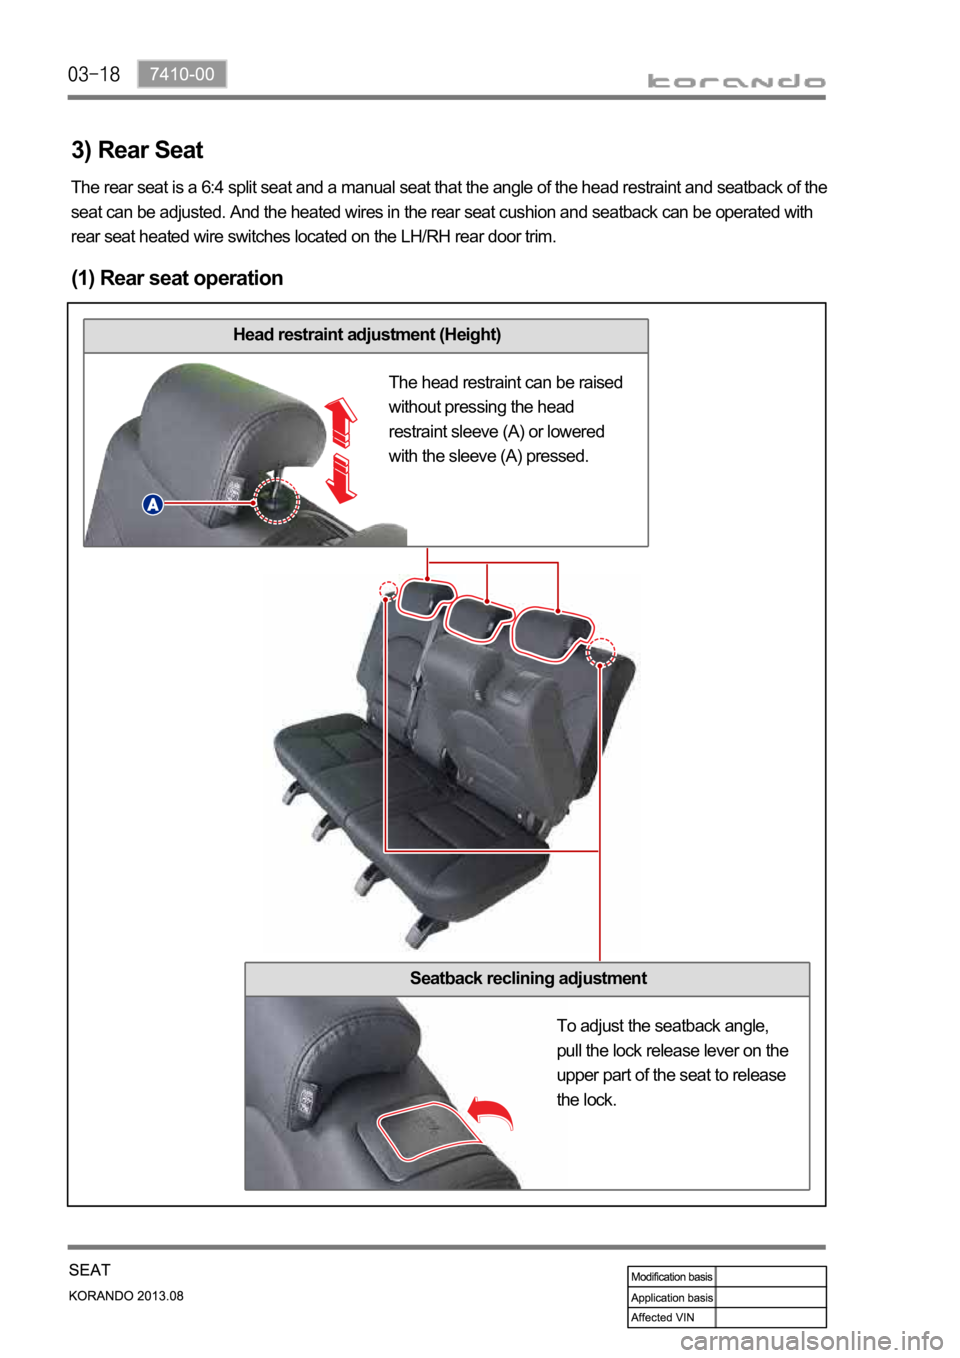 SSANGYONG KORANDO 2013  Service Manual Head restraint adjustment (Height)
3) Rear Seat 
(1) Rear seat operation 
The rear seat is a 6:4 split seat and a manual seat that the angle of the head restraint and seatback of the 
seat can be adju